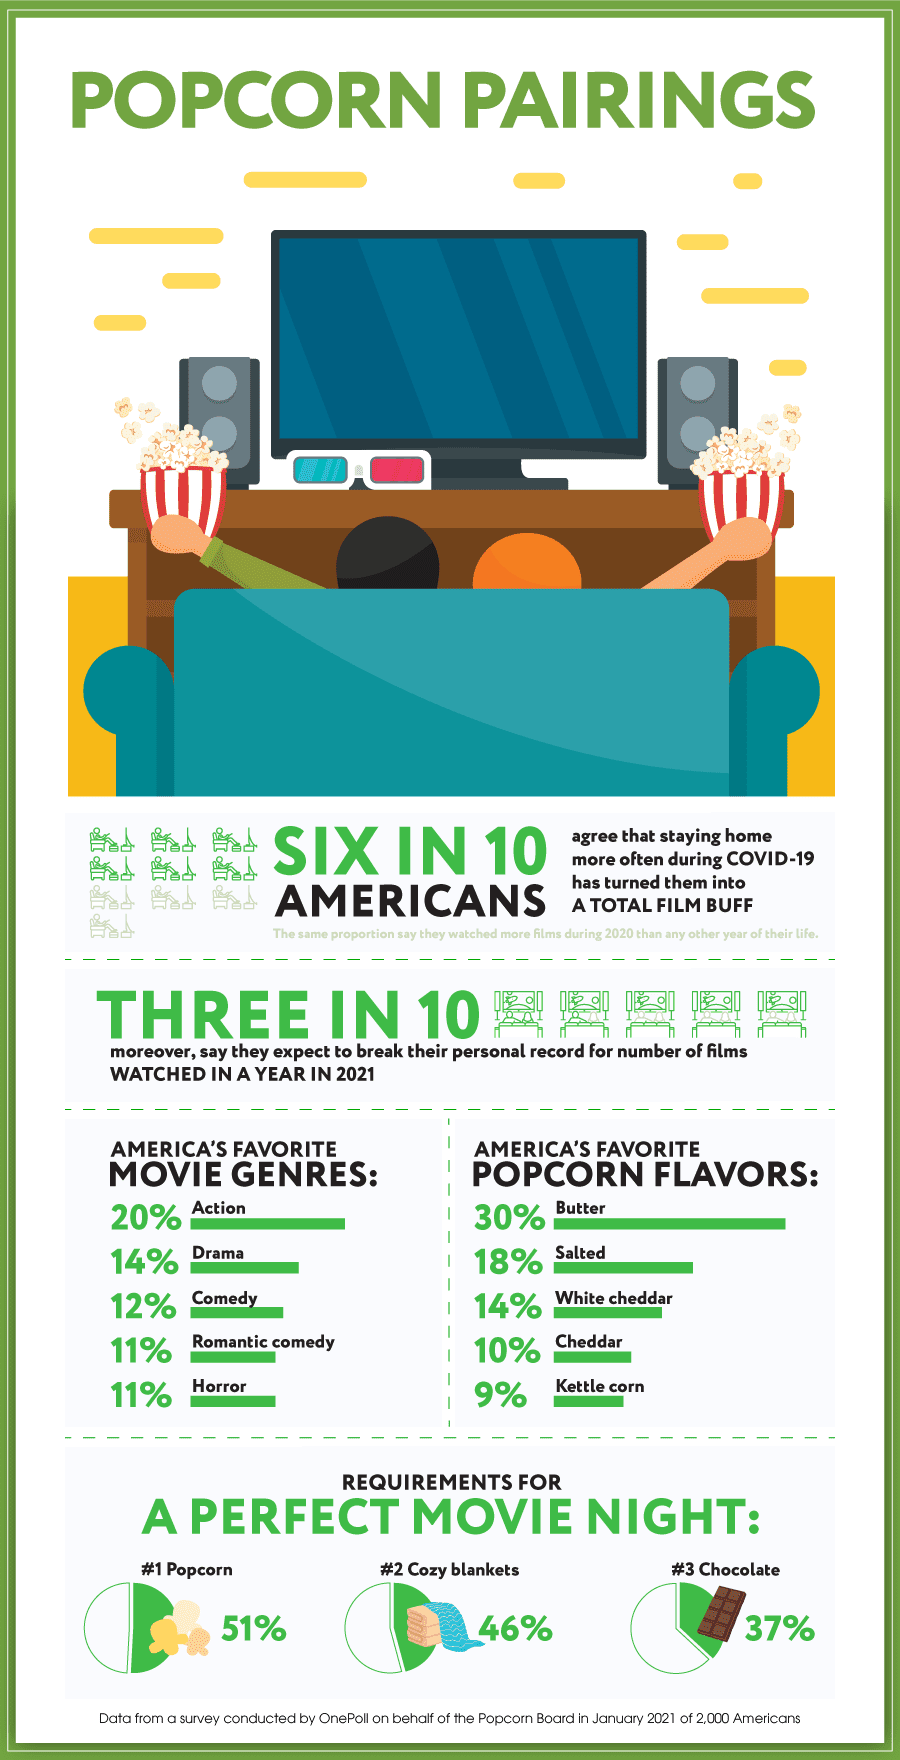 Enjoy National Popcorn Day and a movie!